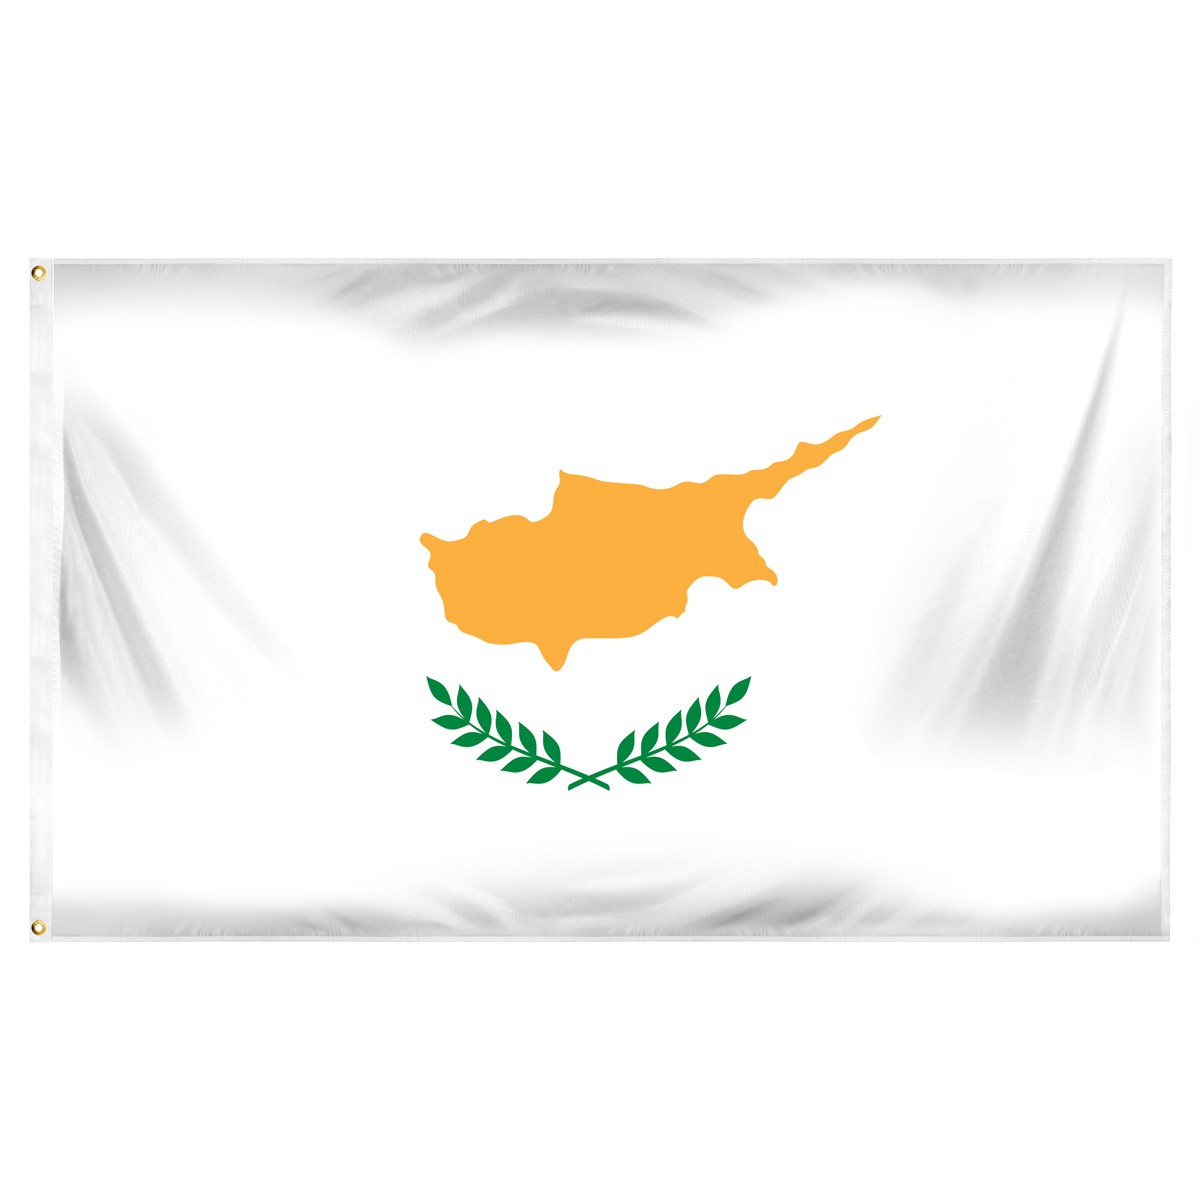 Republic of Cyprus Horizontal Streamers and Flags